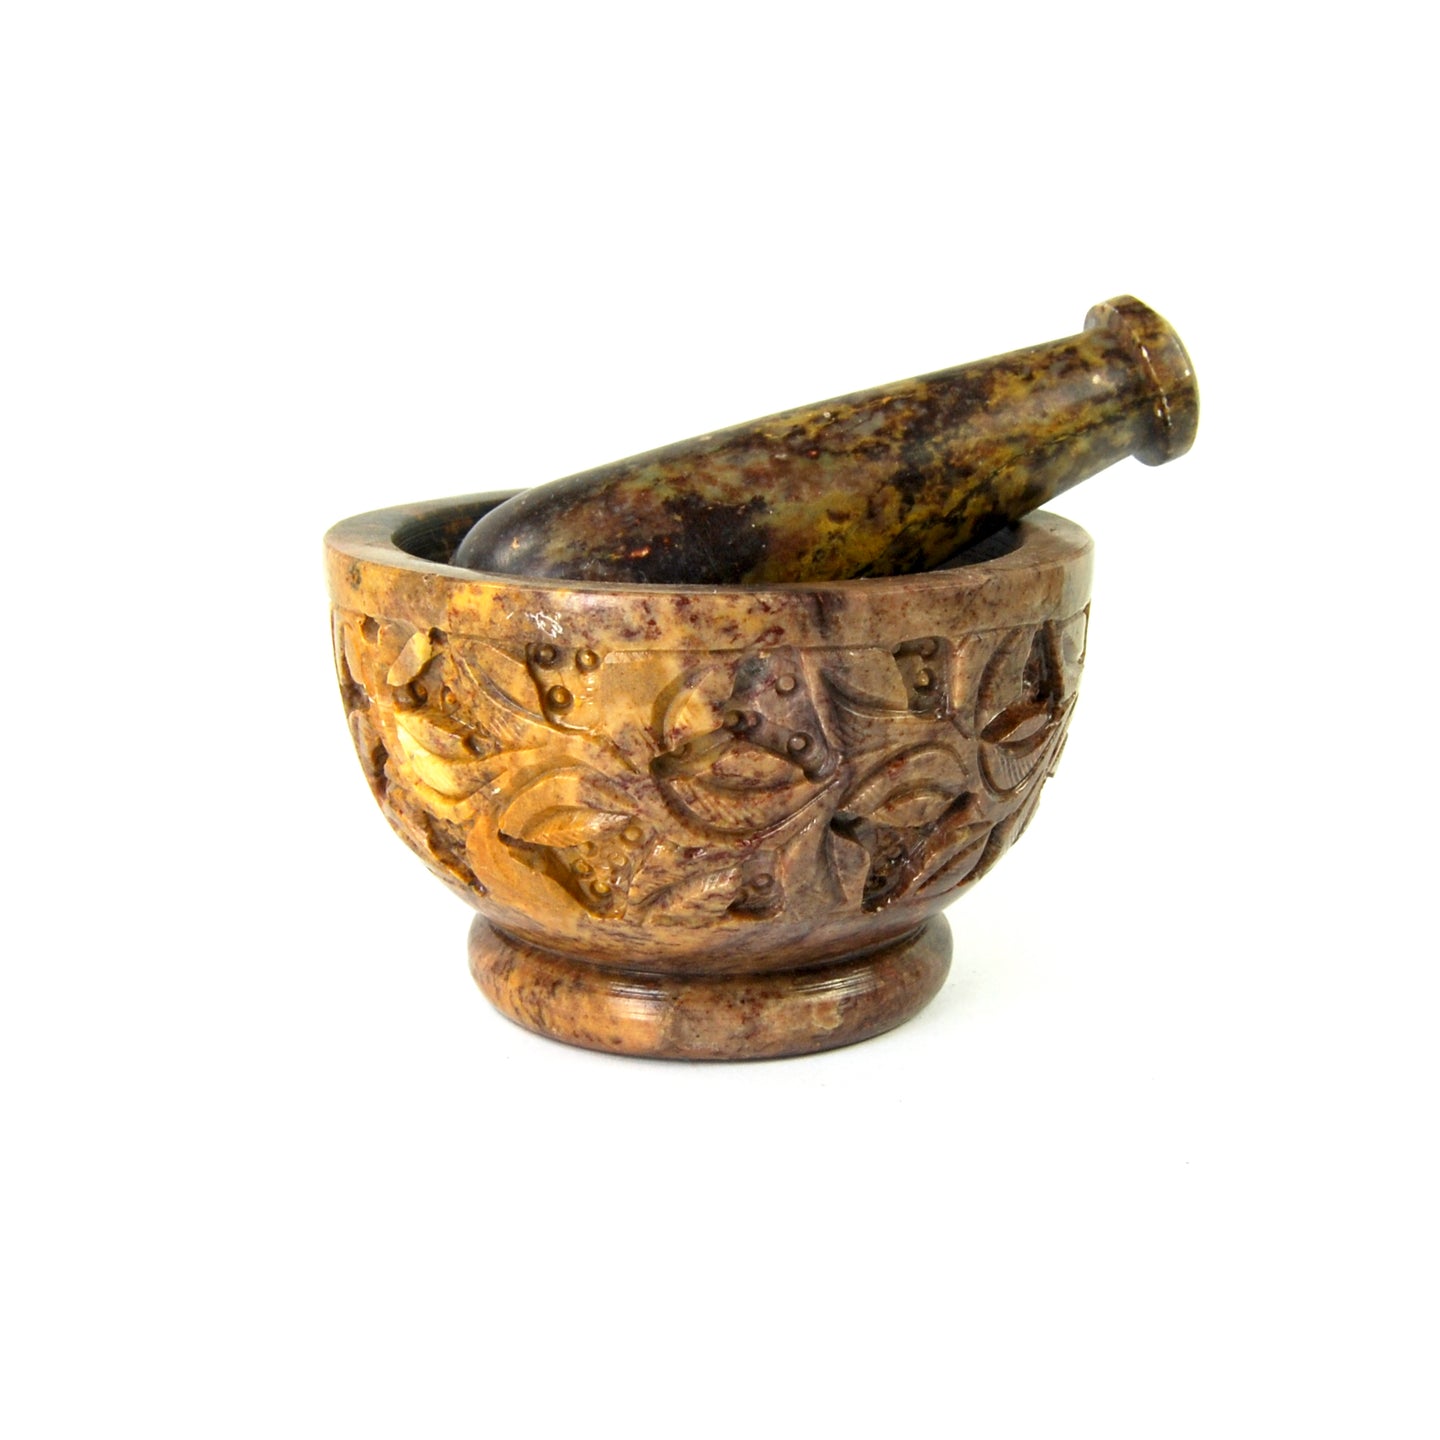 Foliate Carved Mortar and Pestle Natural Soapstone